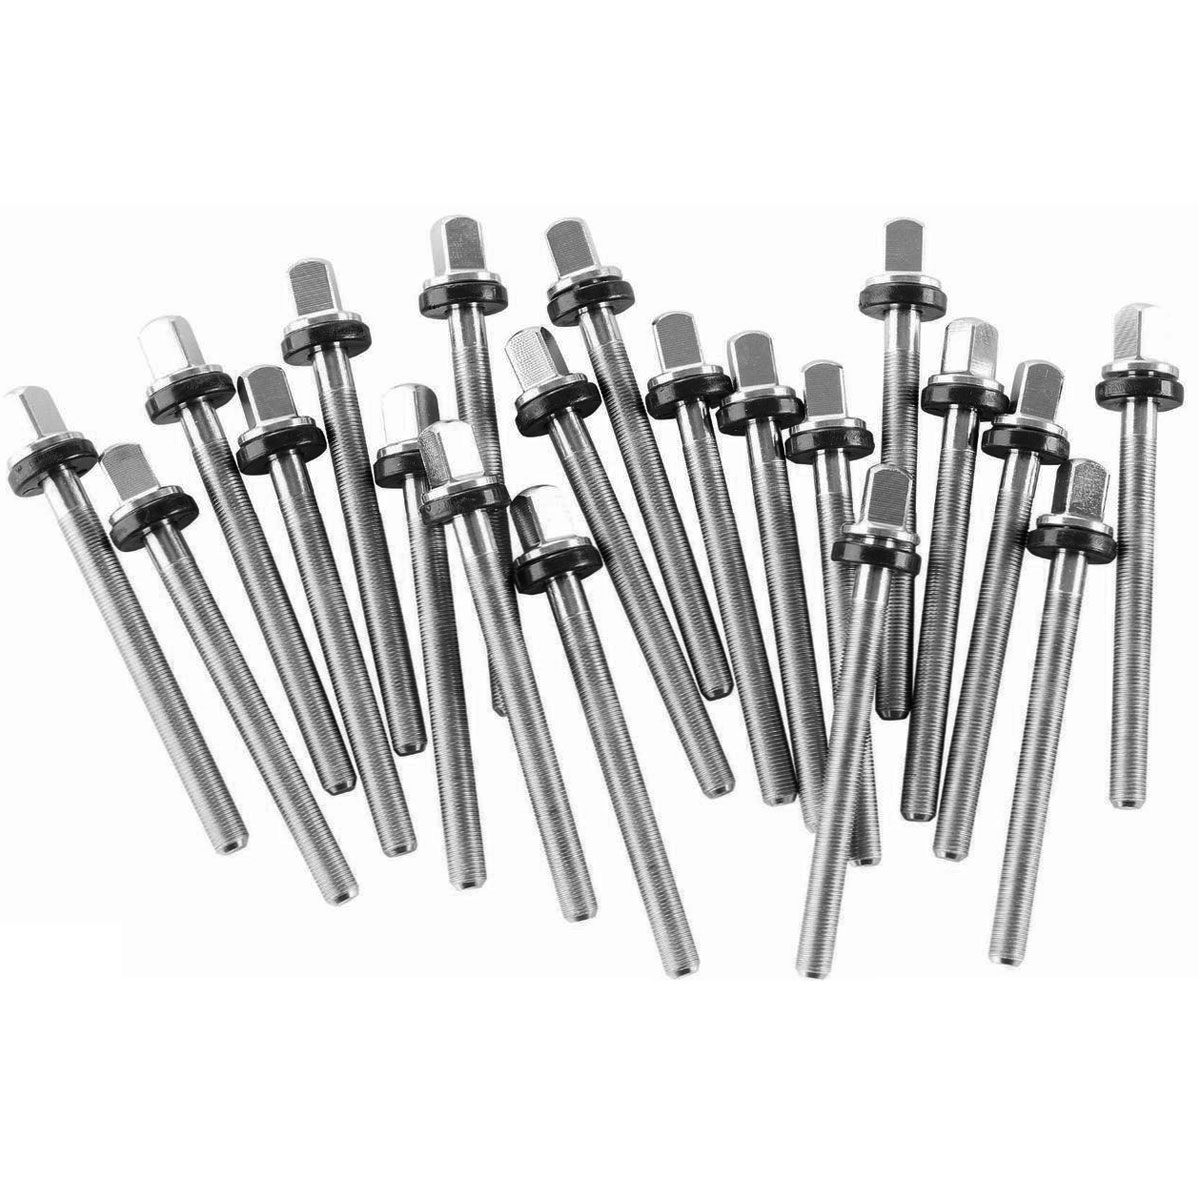 What size are standard drum tension rods